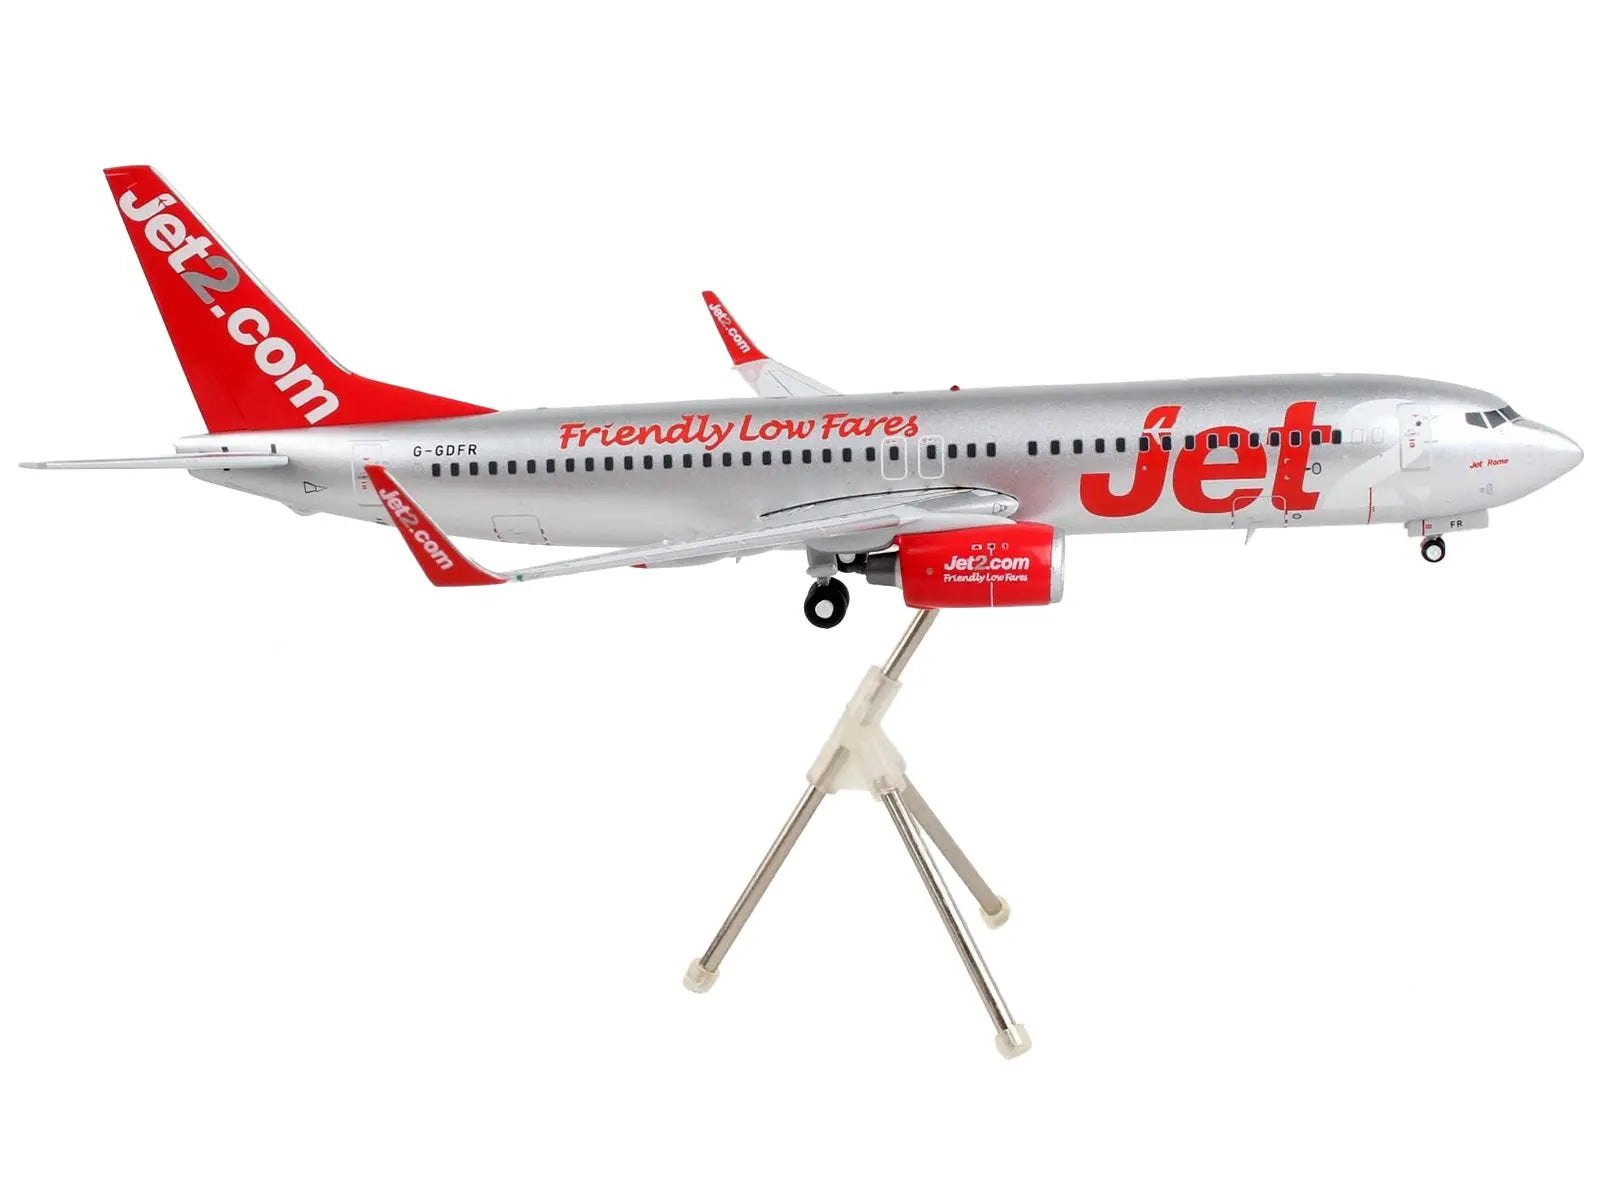 Boeing 737-800 Commercial Aircraft "Jet2.Com" Silver with Red Tail "Gemini 200" Series 1/200 Diecast Model Airplane by GeminiJets GeminiJets